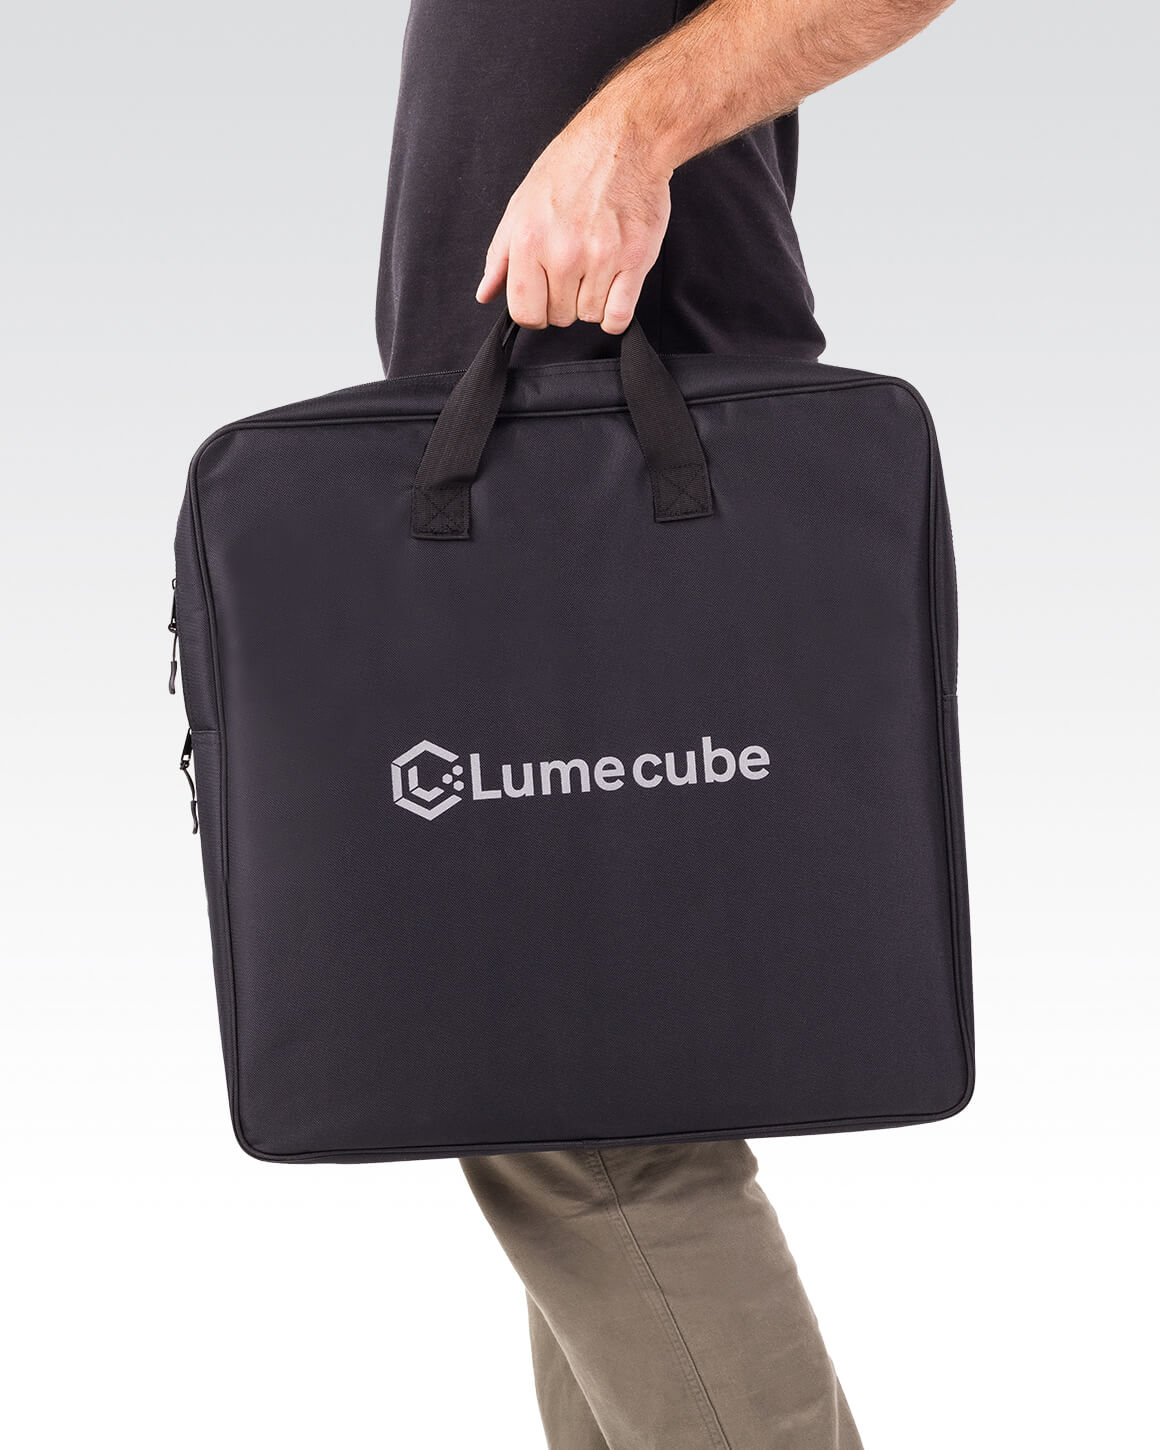 Cordless Ring Light Pro travel case by Lume Cube